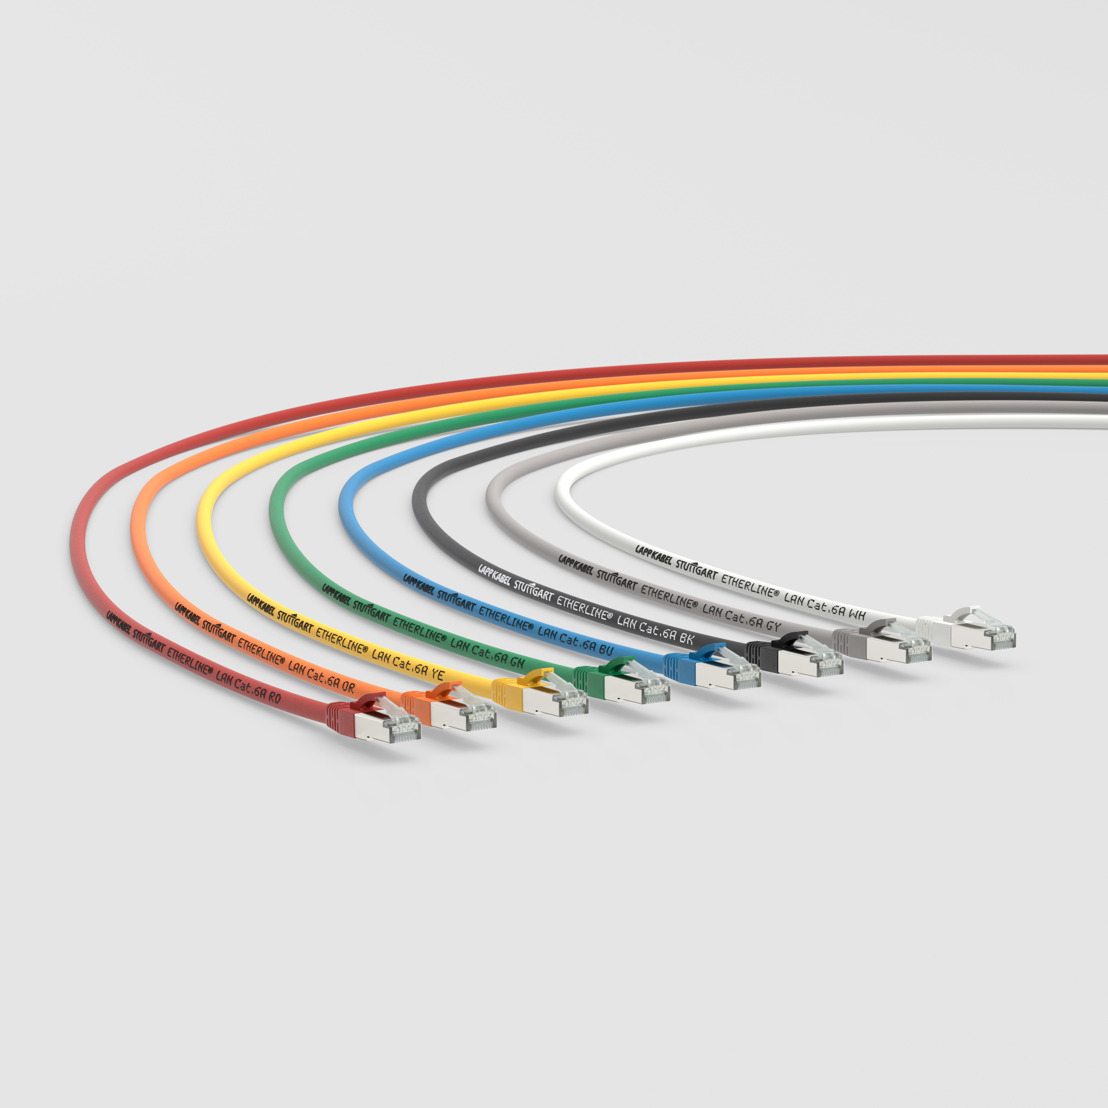 Patchcords with UL certification